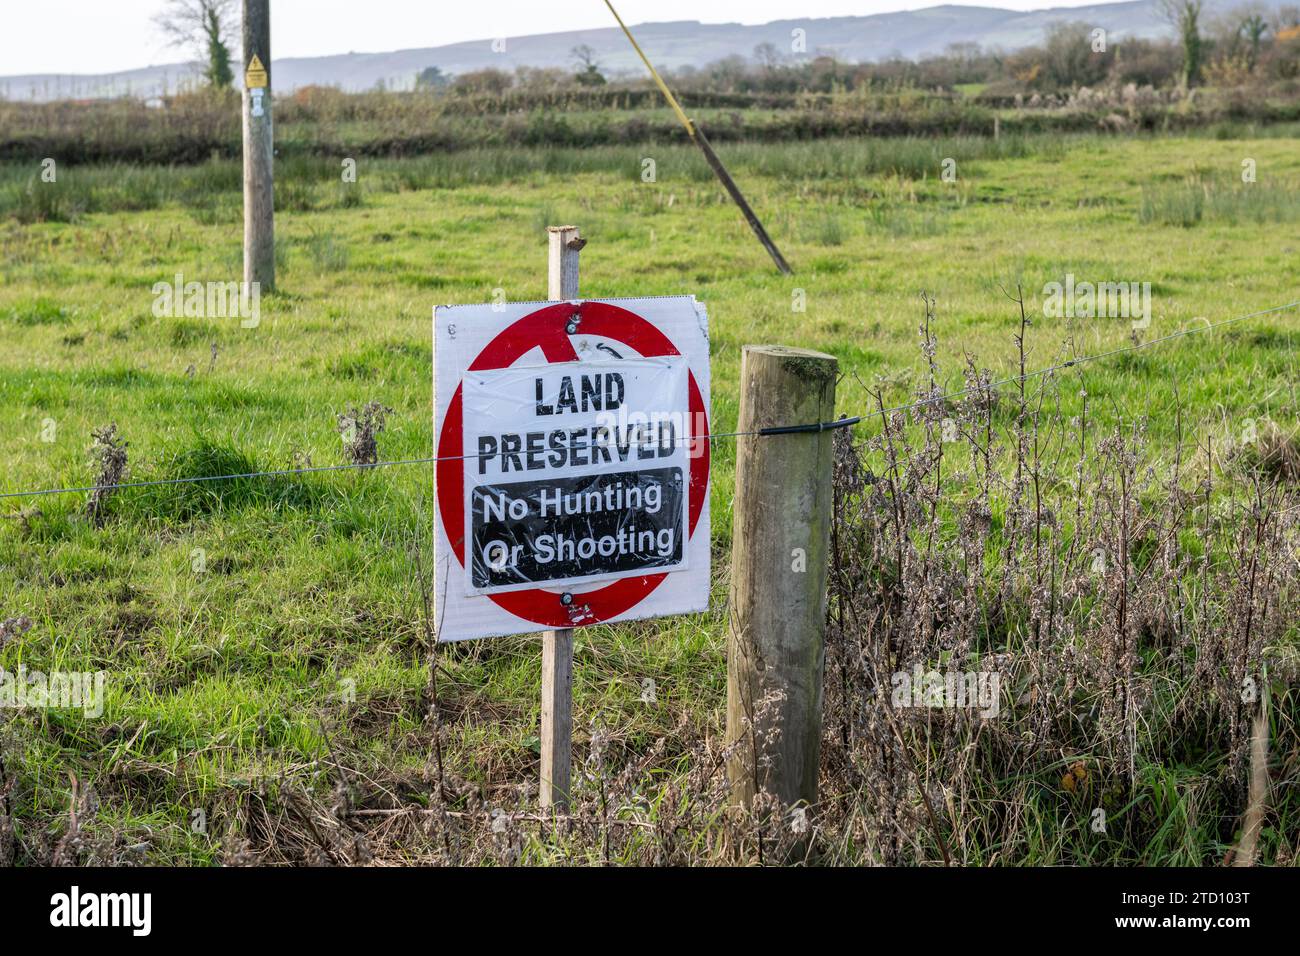 No Hunting or Shooting sign in a field in Ireland. Stock Photo